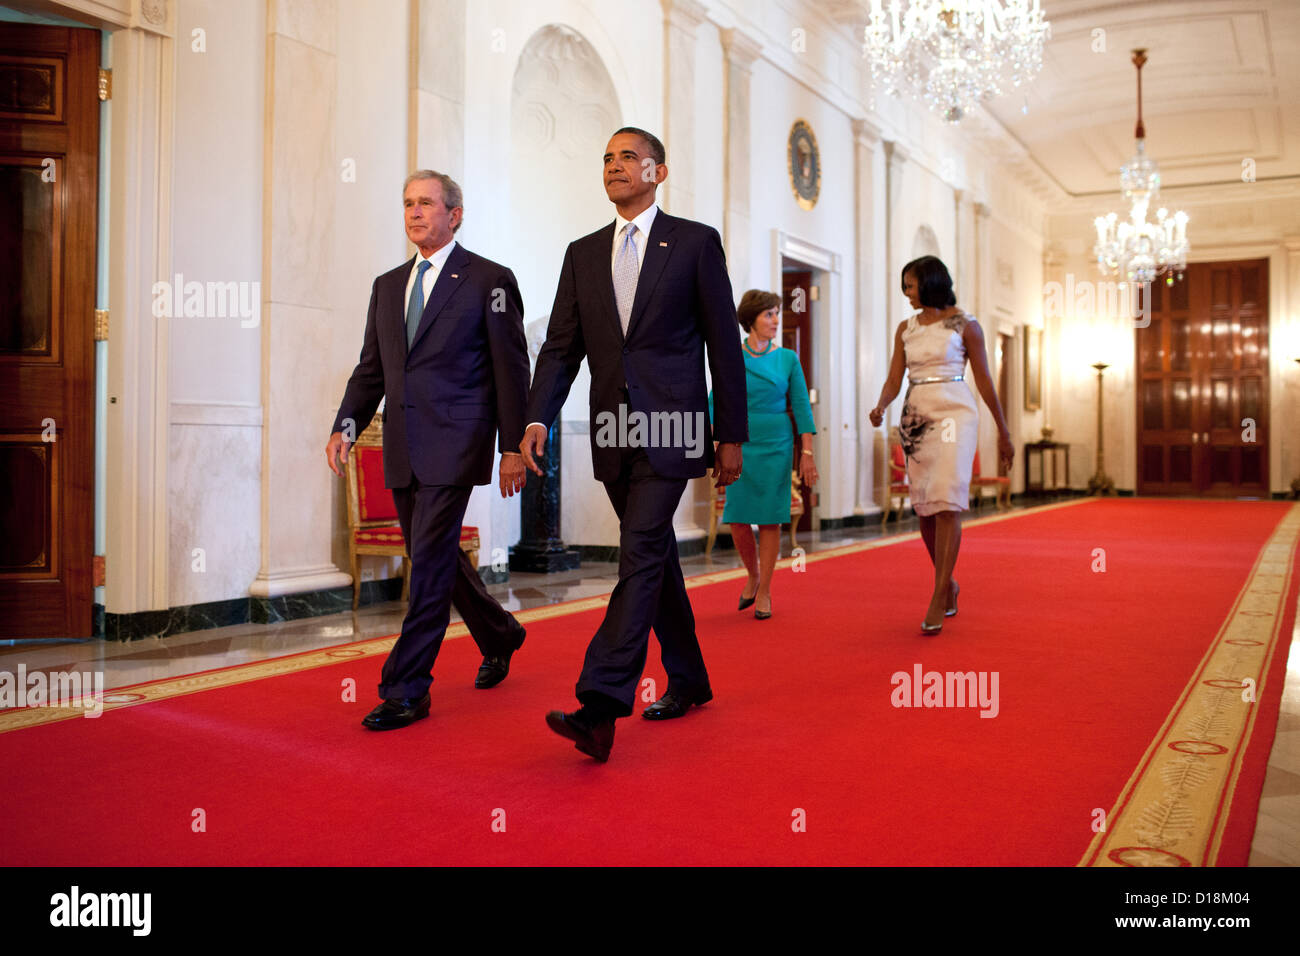 President Barack Obama and First Lady Michelle Obama walk with former President George W. Bush and former First Lady Laura Bush Stock Photo